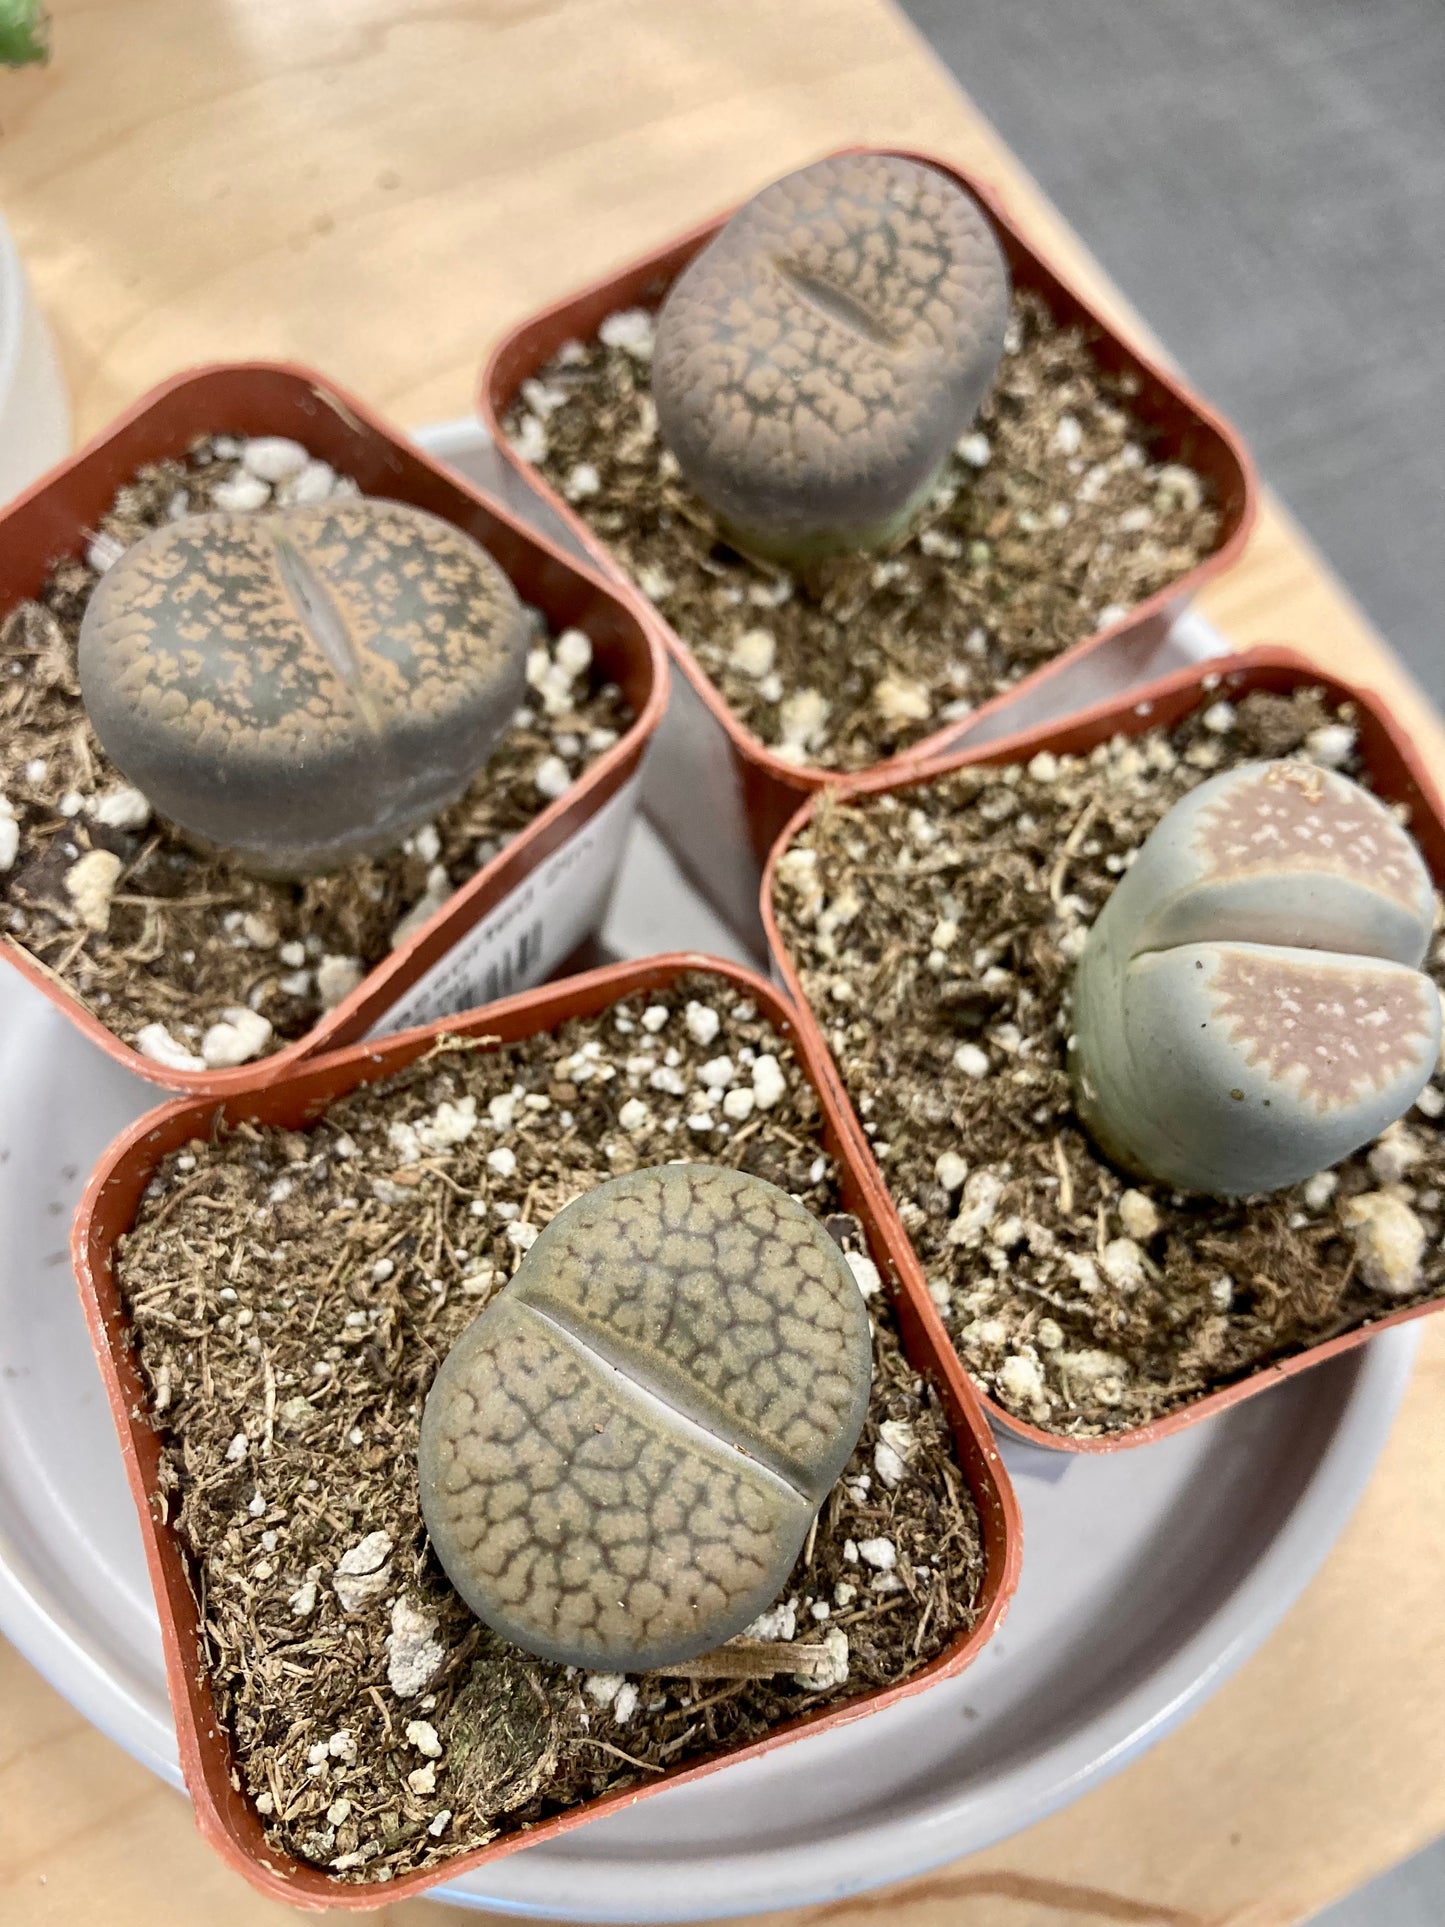 Lithops assorted 2in